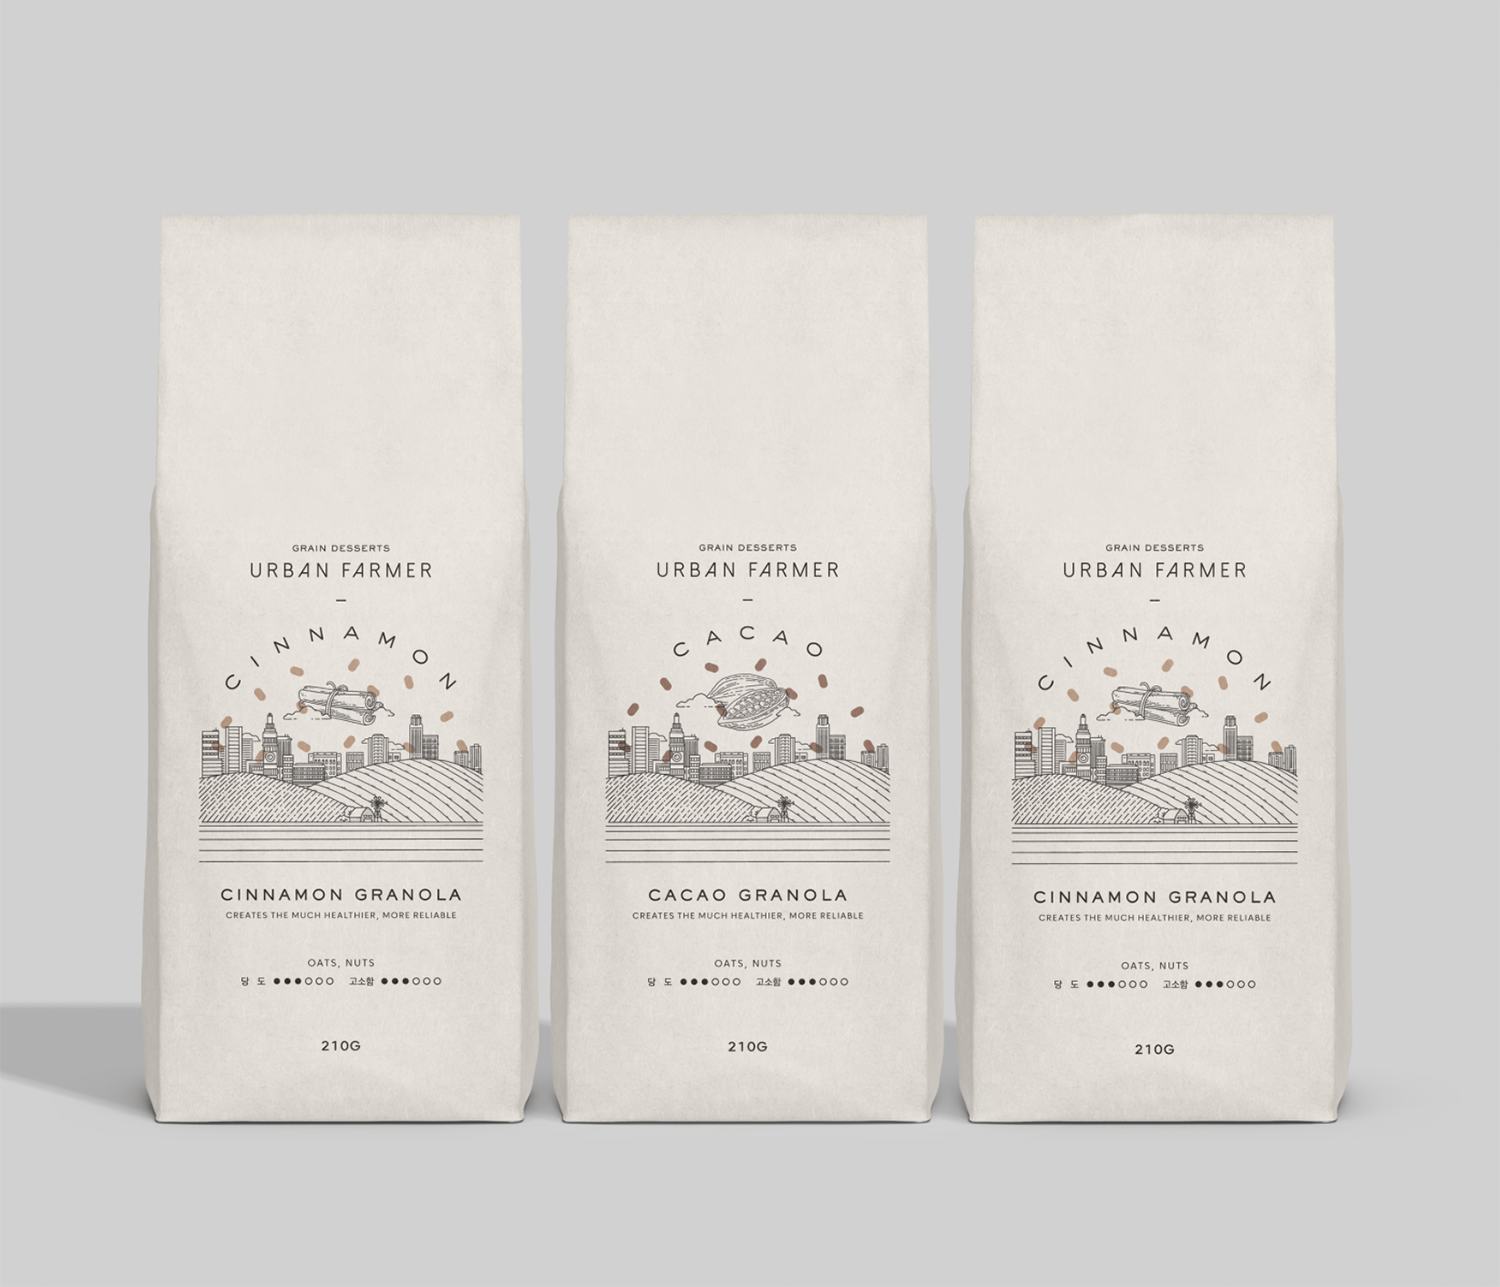 10 Stimulating Coffee Packaging Examples for Design Inspiration | CaseMakes